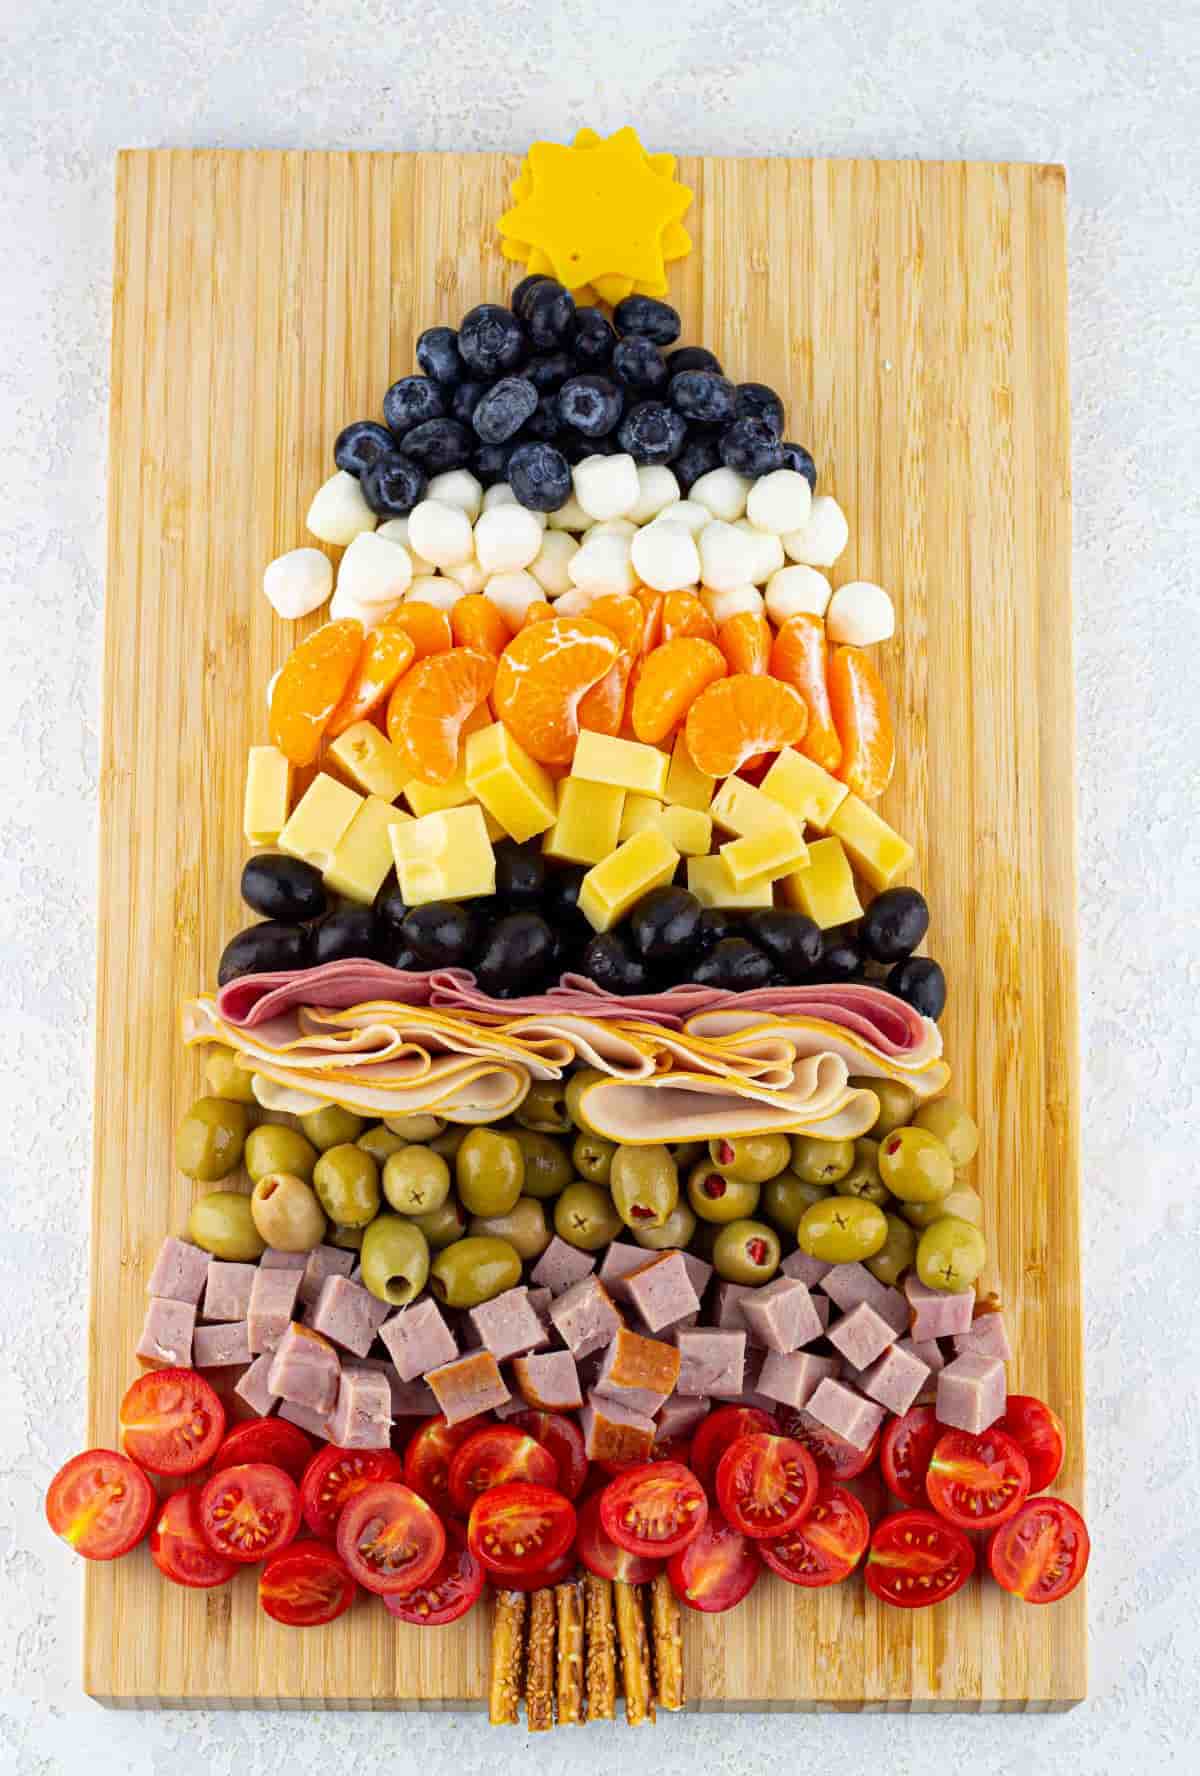 A Christmas tree charcuterie board made of cheeses, meats, and fruits.